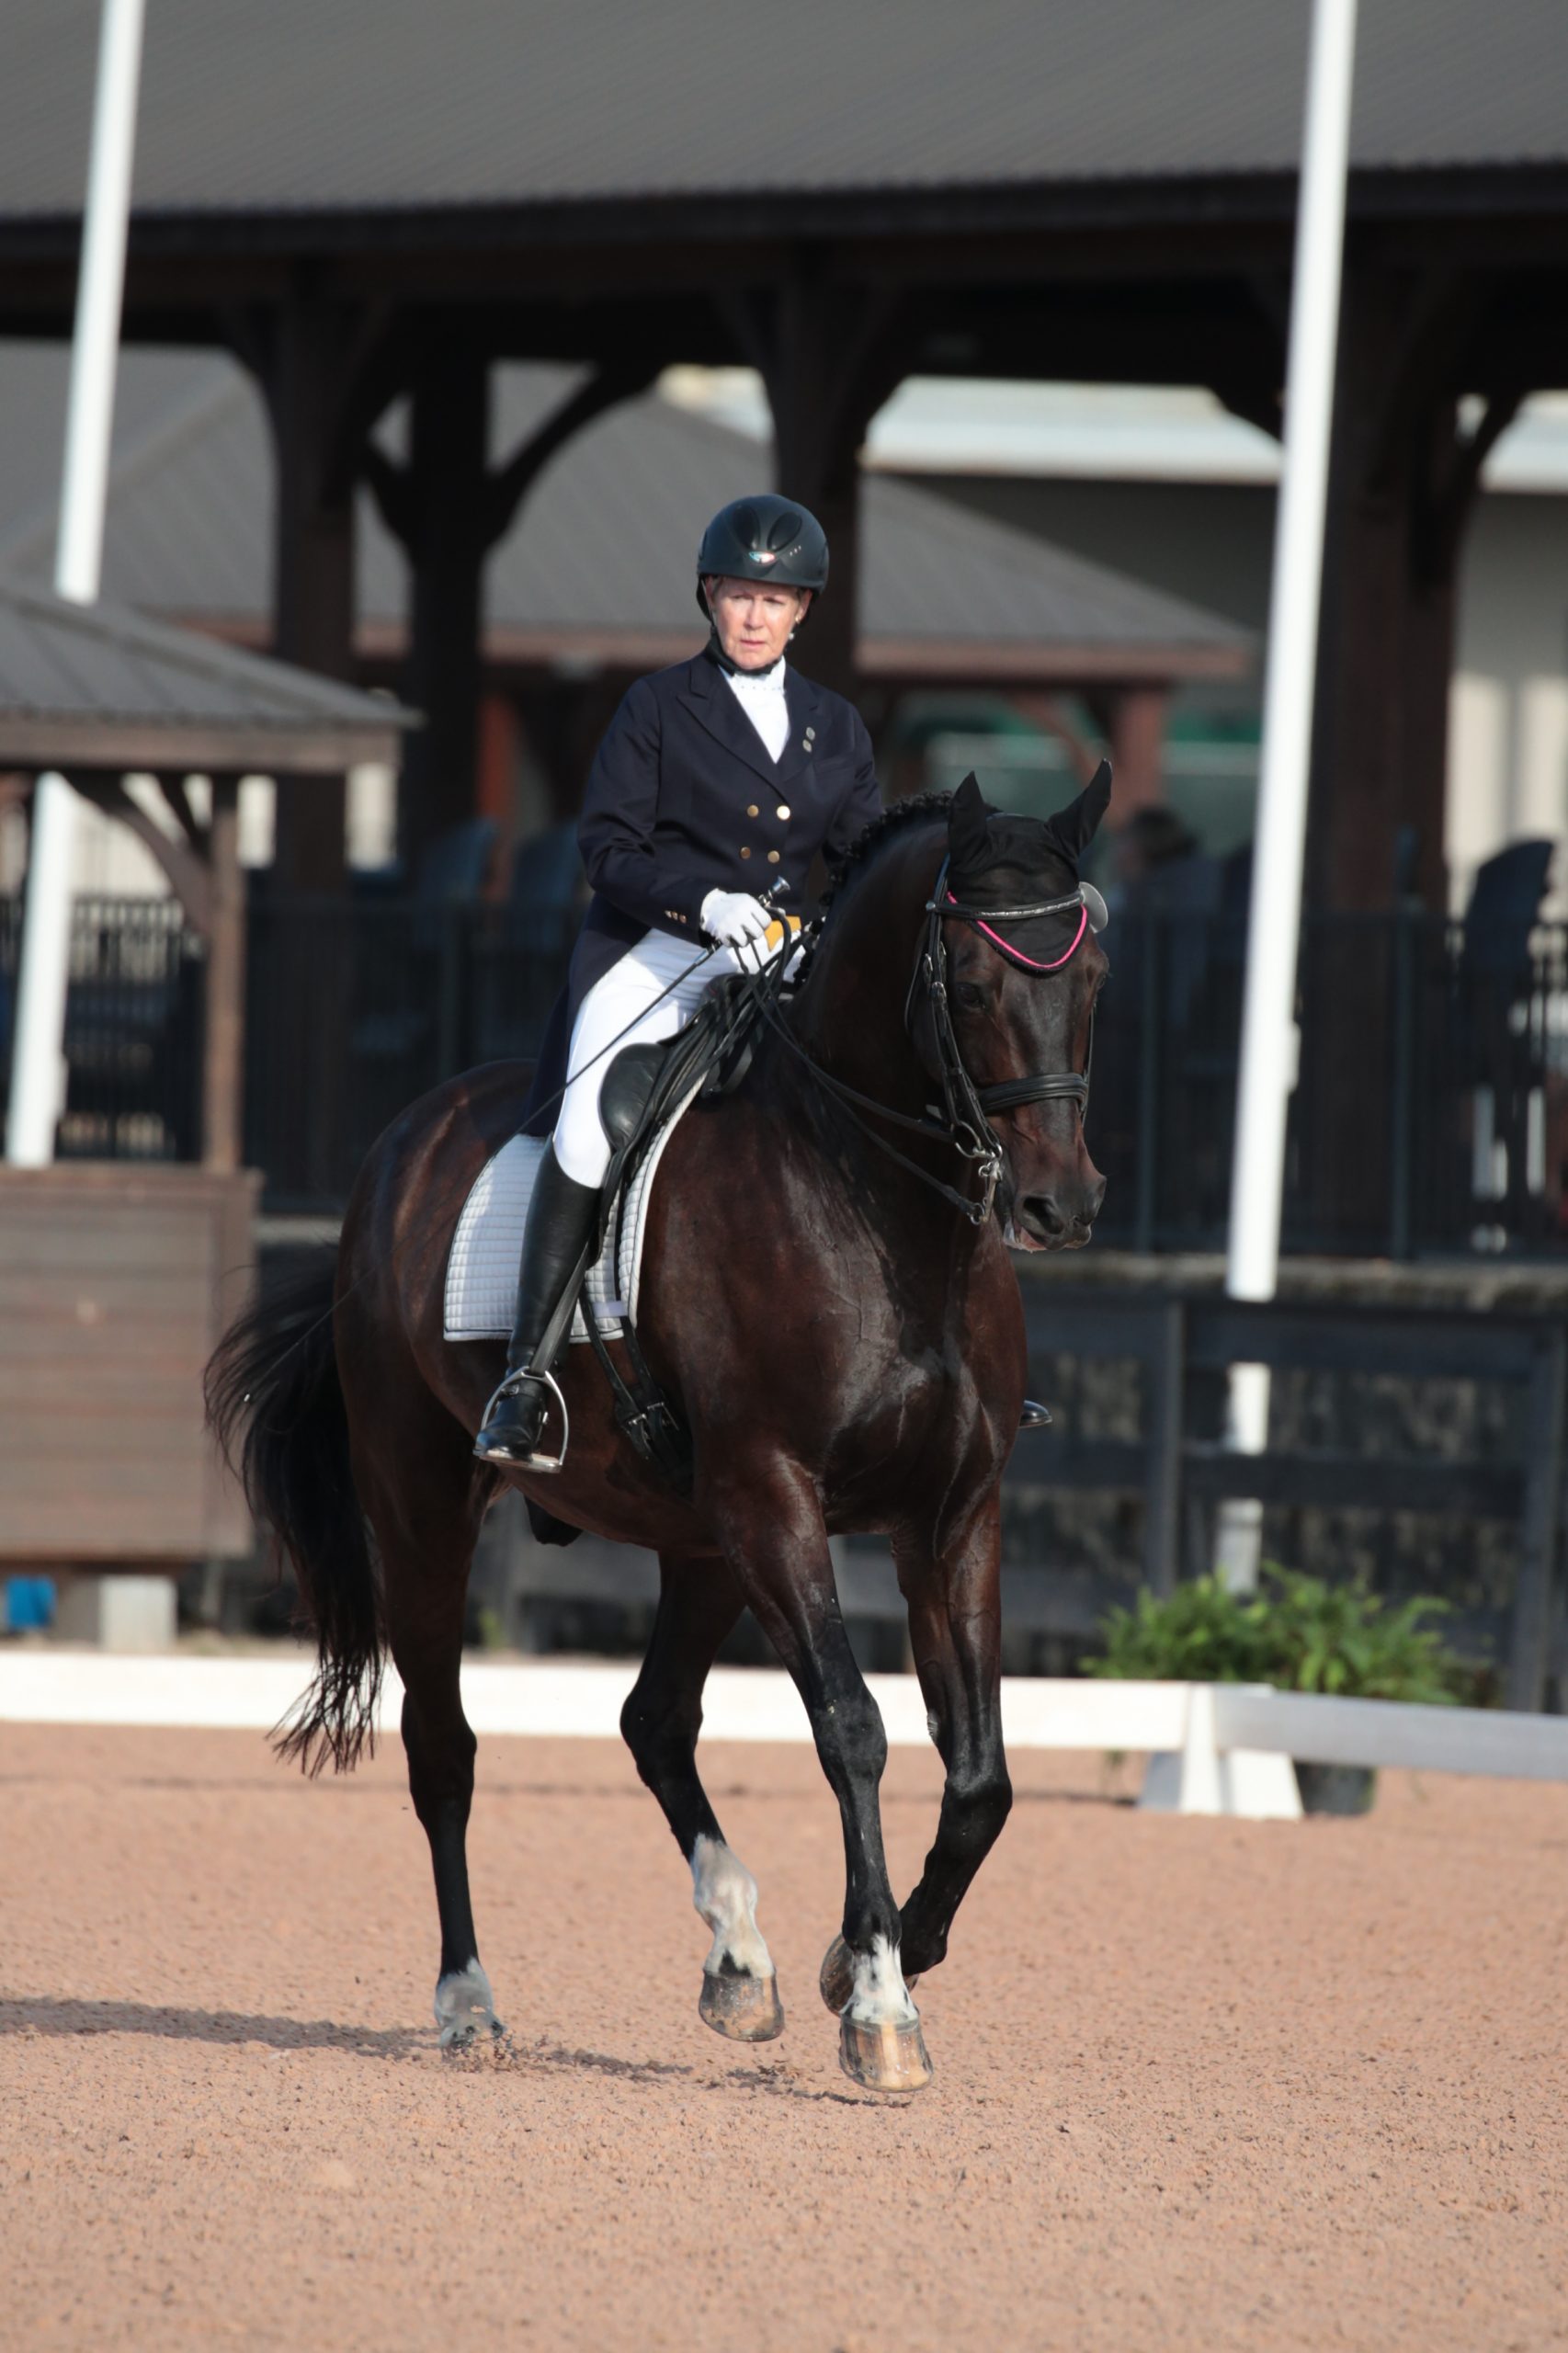 Susan Todd of Hidden Creek Dressage in Blythewood competes on Geyser, an imported Danish Warmblood, at the International Equestrian Federation Prix St. Georges level in dressage at the Tryon, NC International Equestrian Center.  Photography courtesy of Sharon Packer